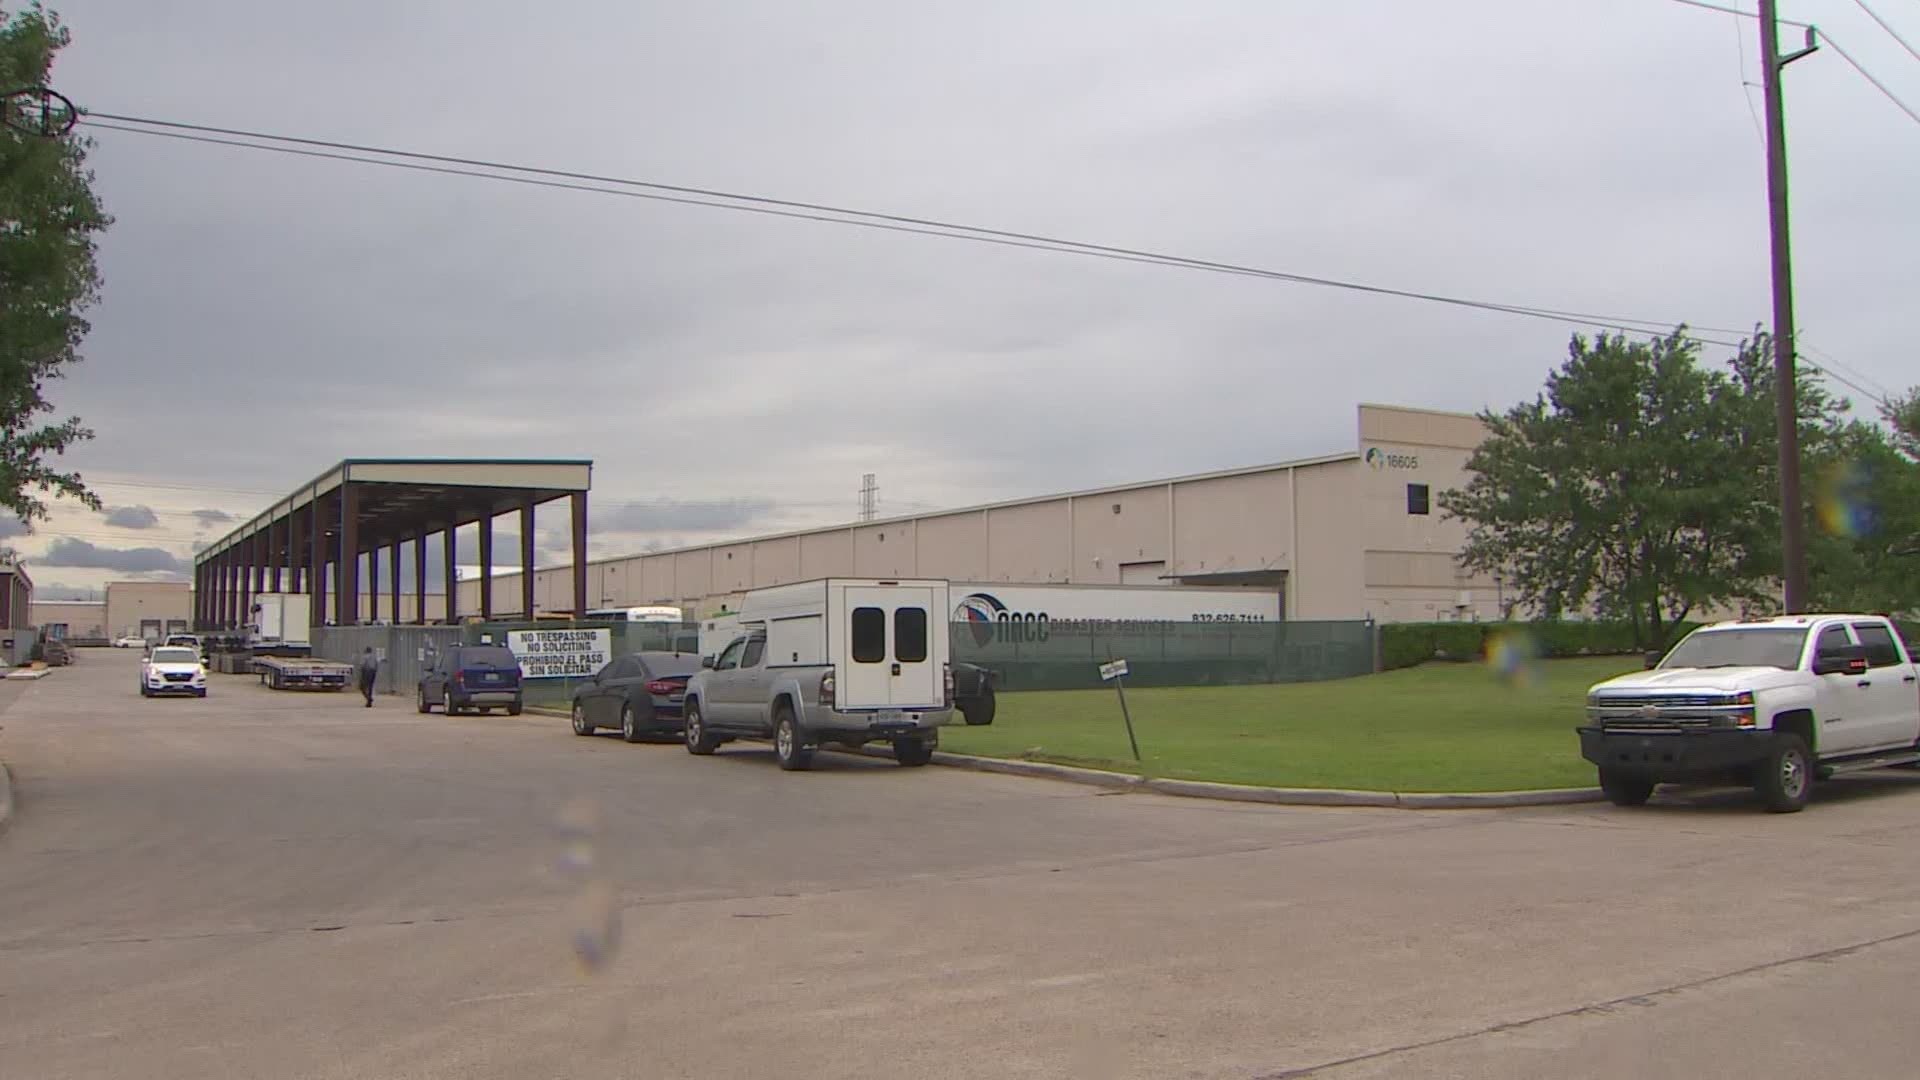 The U.S. Department of Health and Human Services said they are working on transferring all of the unaccompanied minors being housed at Houston's emergency shelter.